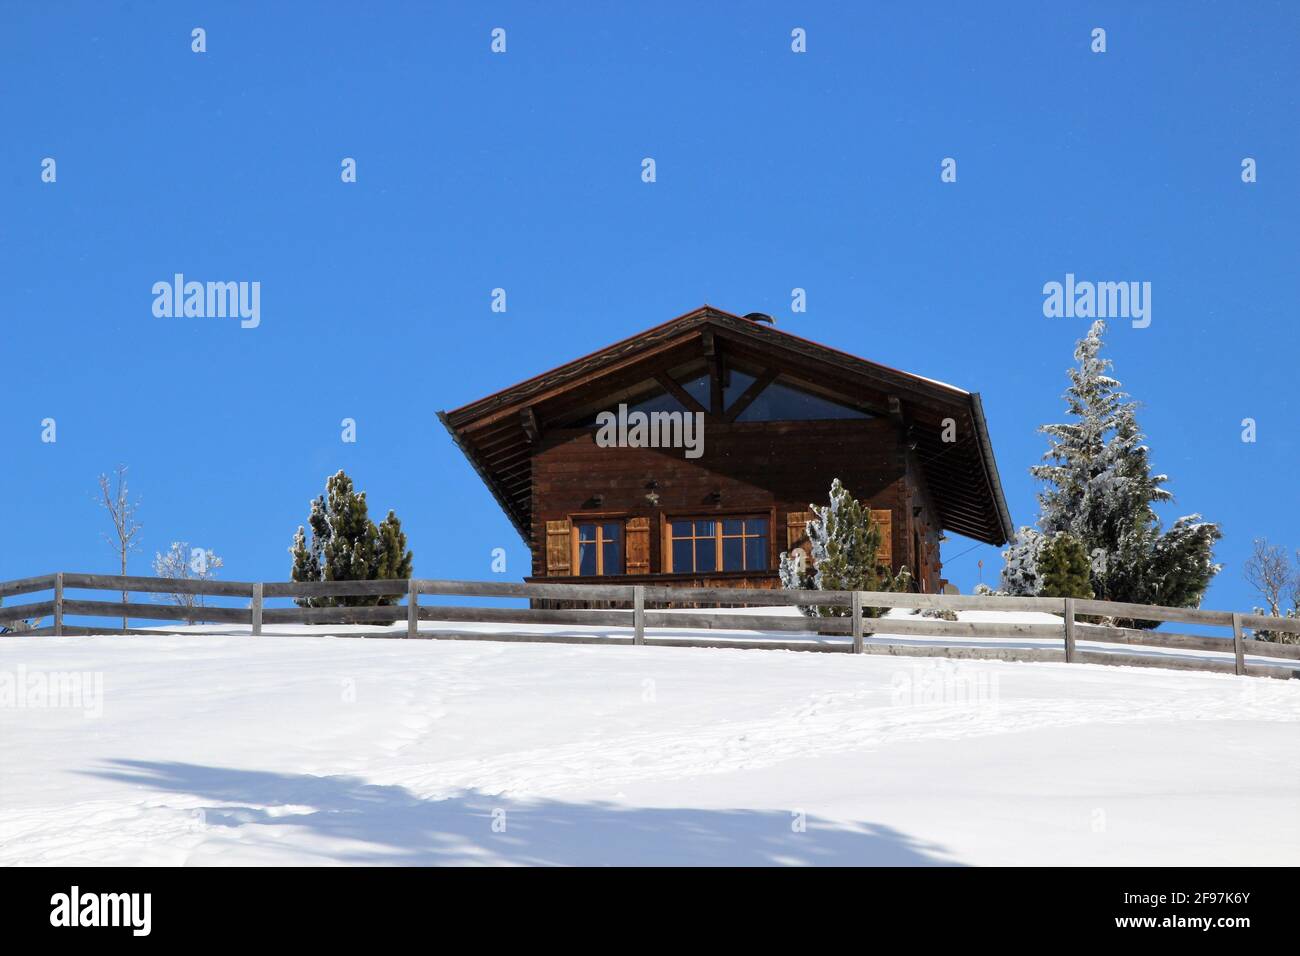 Hut invites you to take a break on the summit of the Eckbauers near Garmisch Partenkirchen. Snow-covered trees, fence in a snowy landscape at the Eckbauer. Winter in Werdenfelser Land, Europe, Germany, Bavaria, Upper Bavaria, dream weather Stock Photo